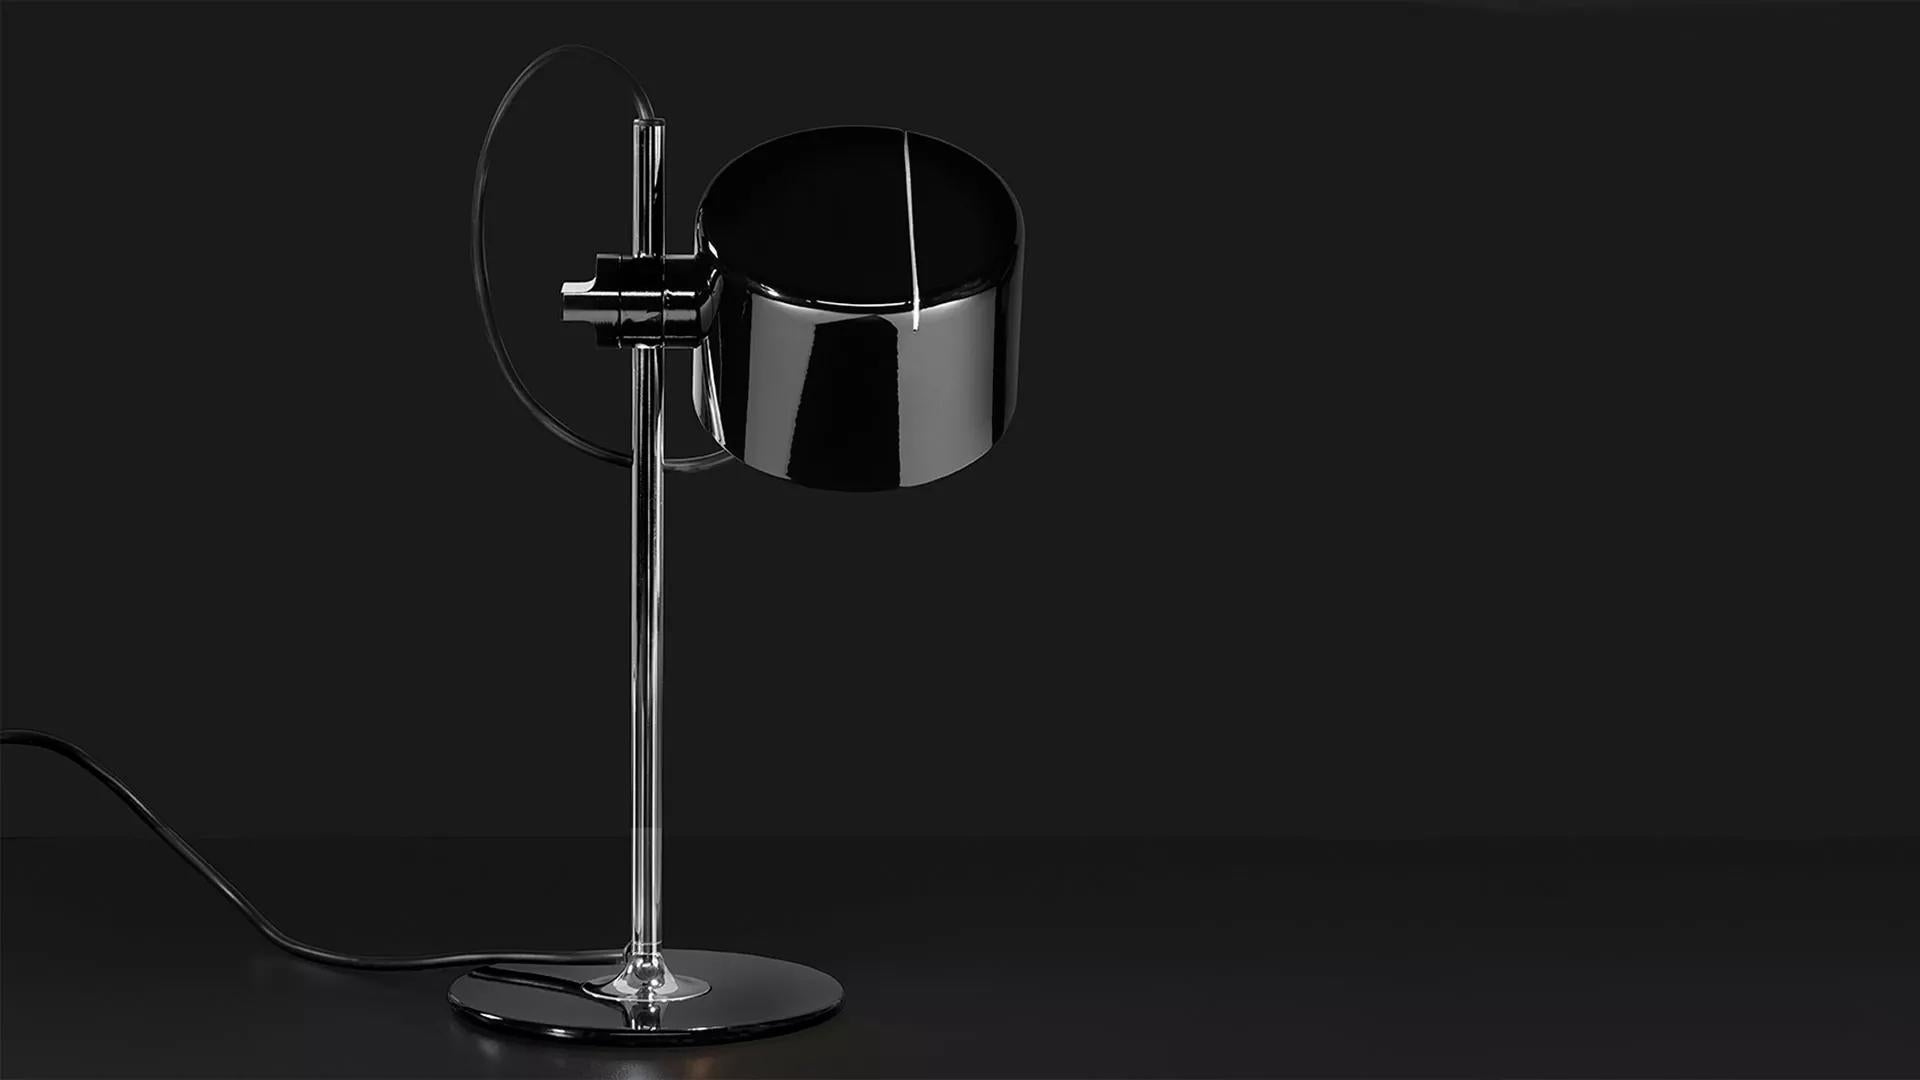 Joe Colombo Model #2201 'Mini Coupé' table lamp in black for Oluce. 

Executed in black enameled metal and chrome, this table lamp is a smaller-scale version of one of the most refined Minimalist Italian designs of the midcentury and an icon for